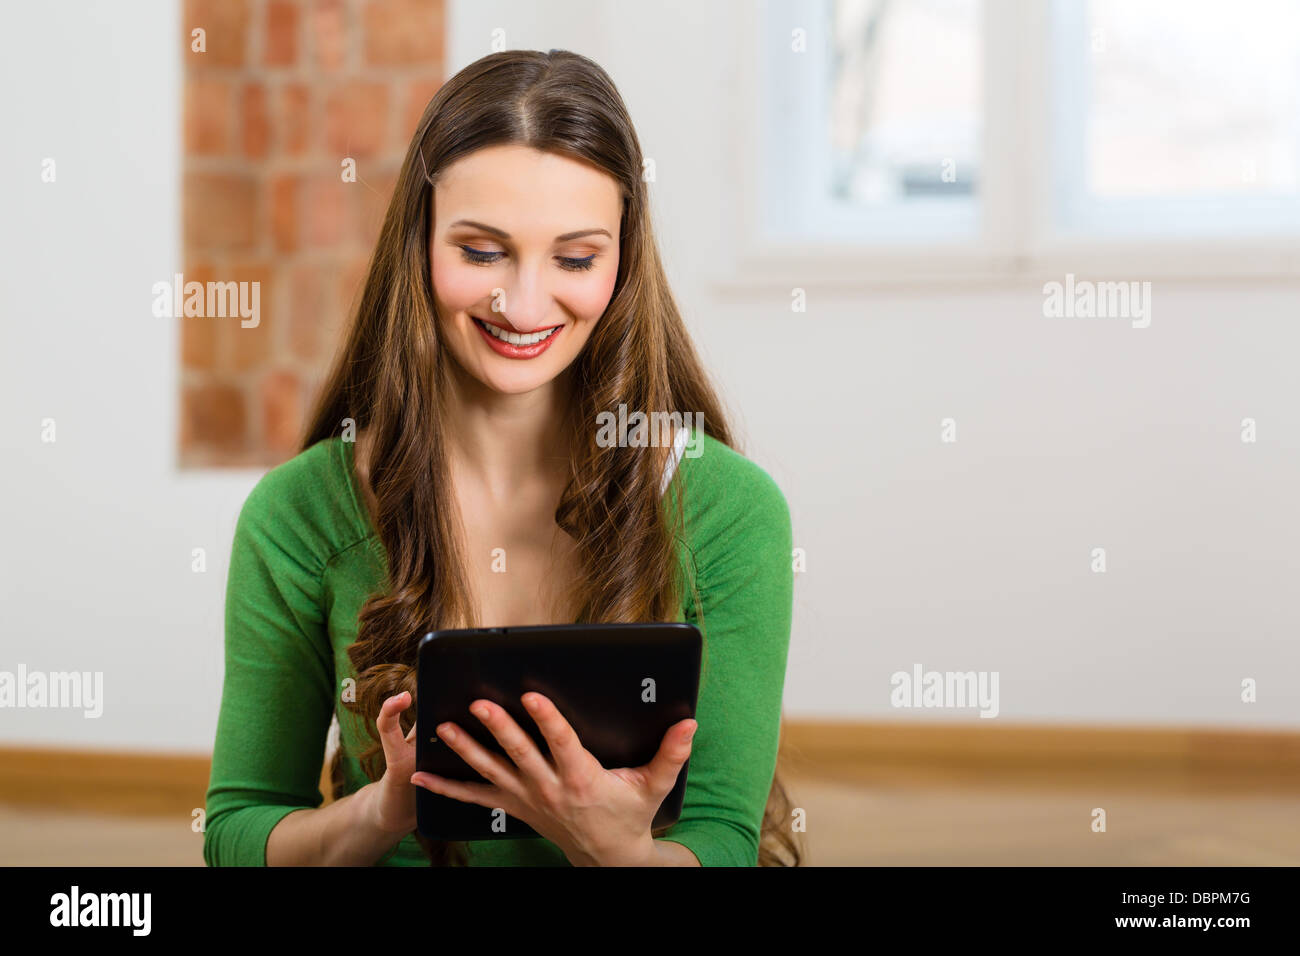 Online Dating - young woman sitting at home on the floor and buying new furniture over the Internet using a tablet computer Stock Photo